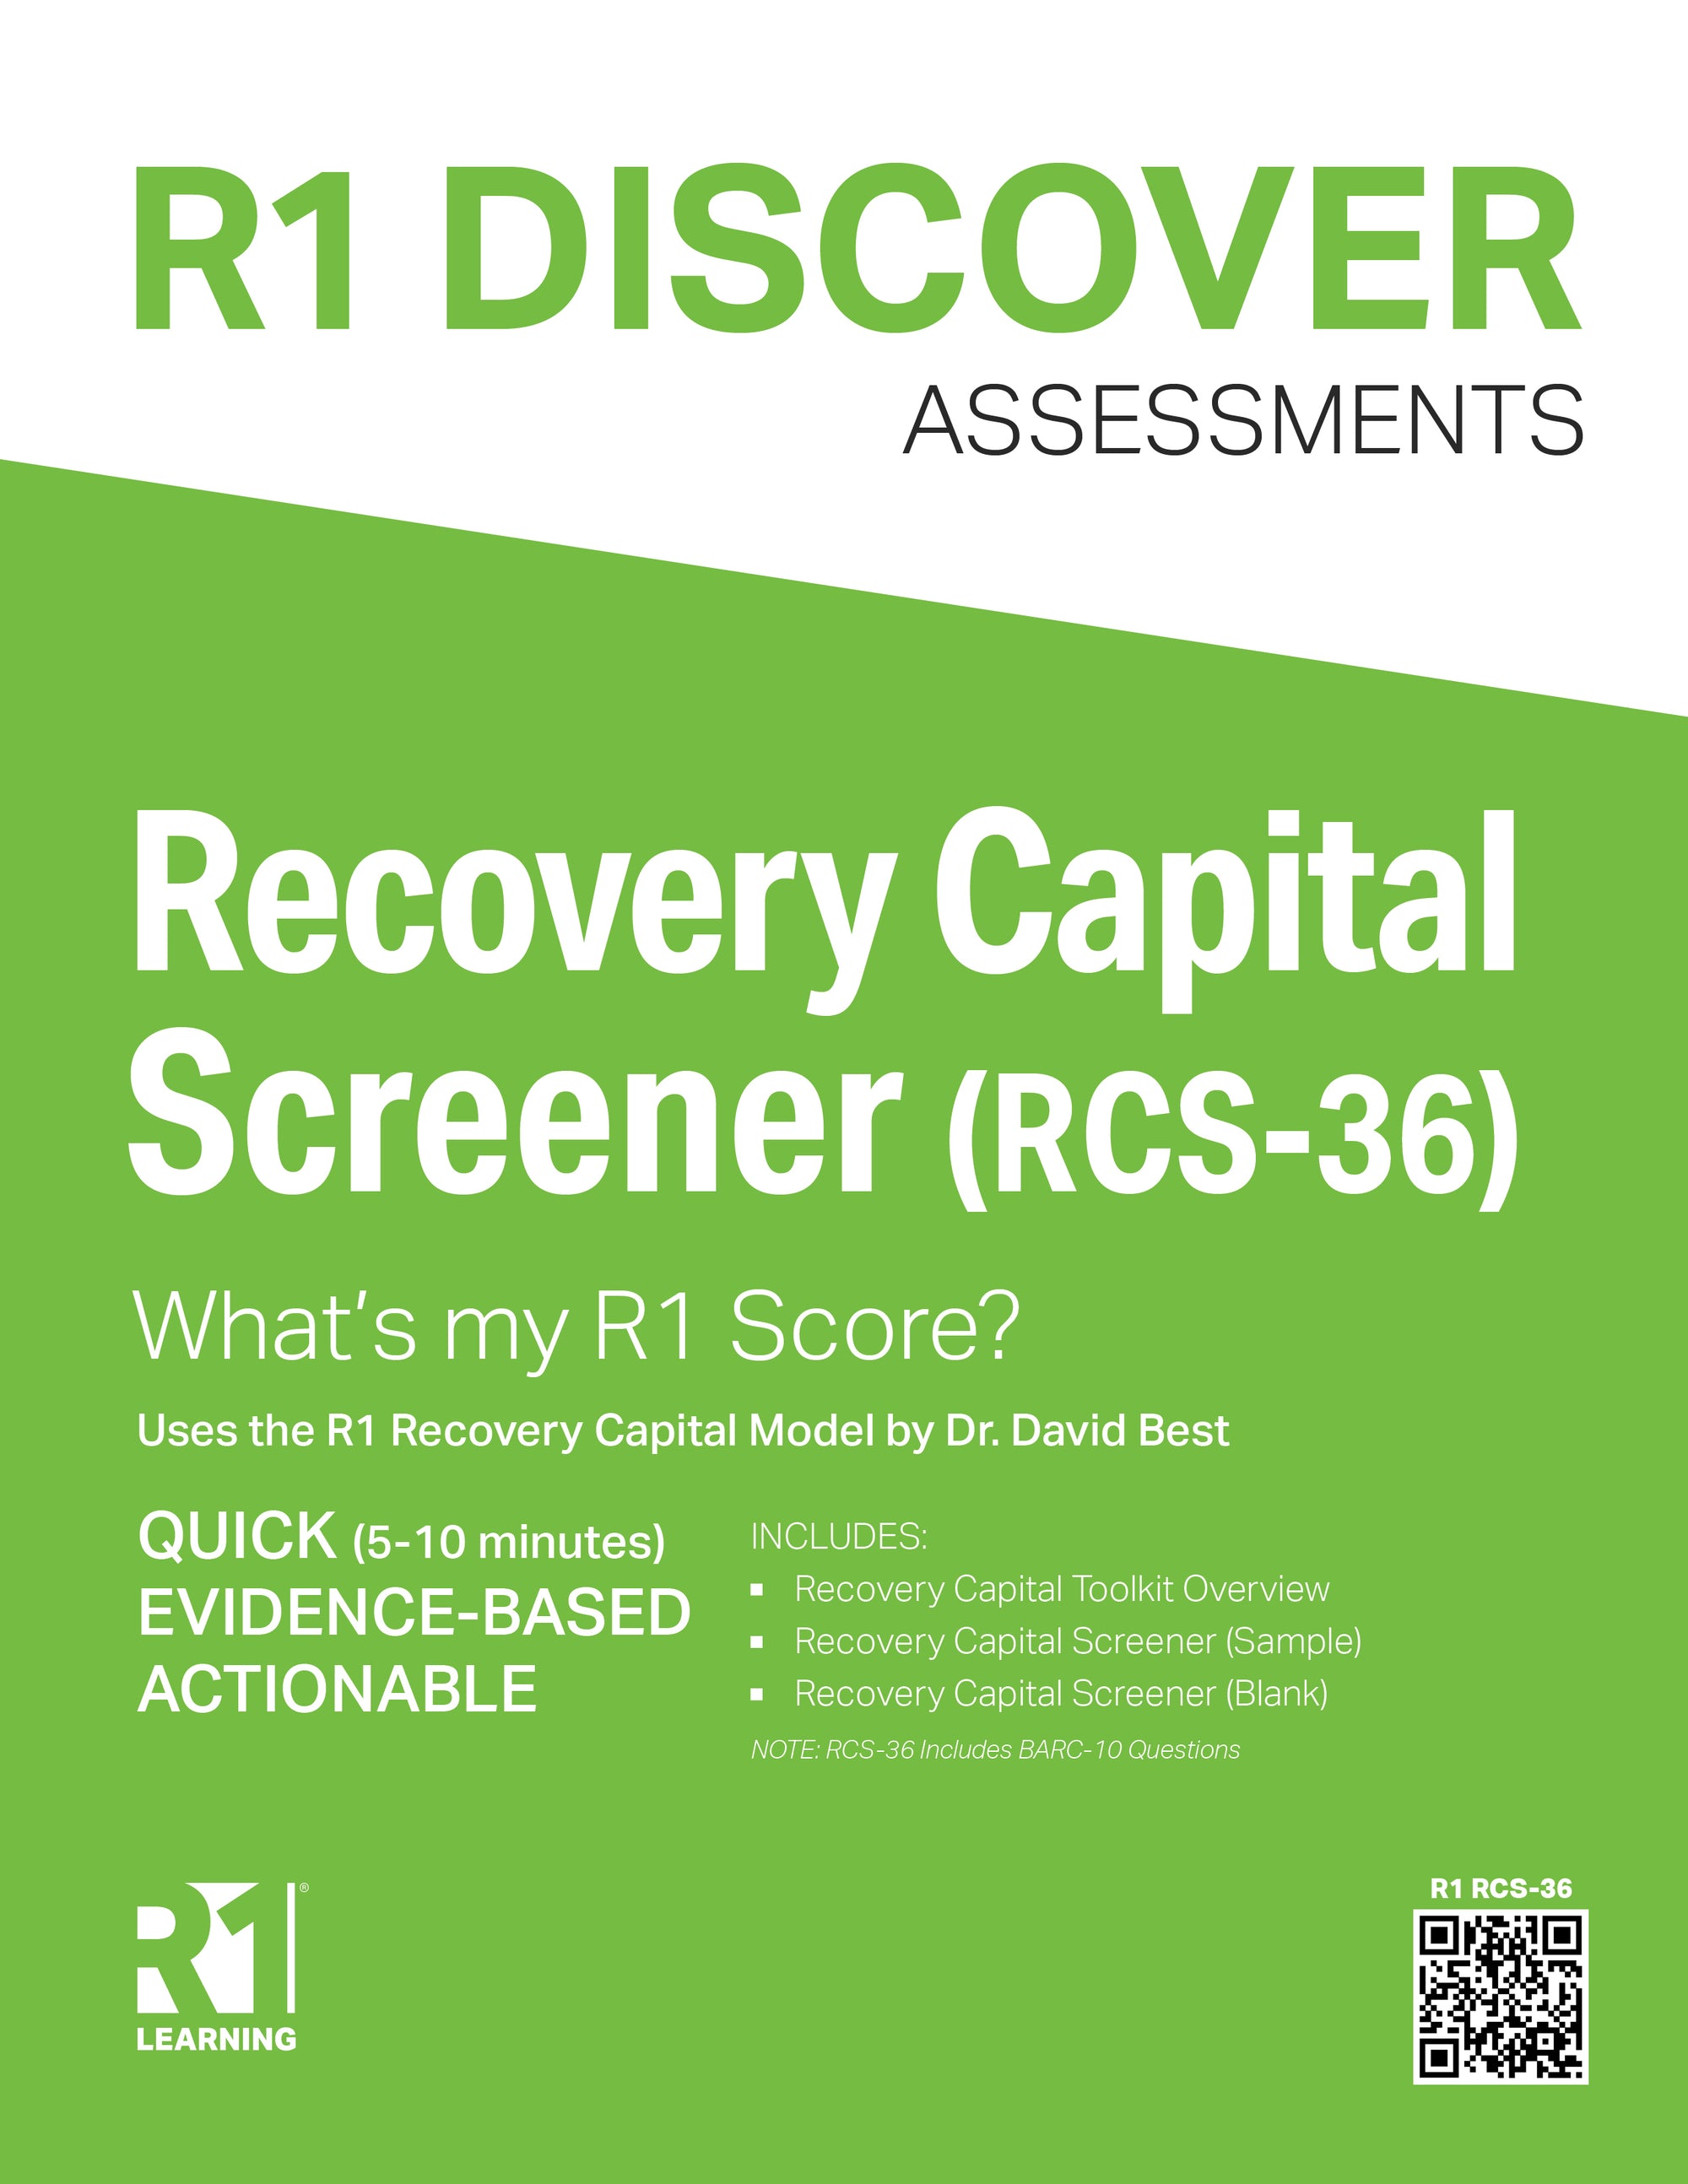 Recovery Capital Screener (RCS-36), Color Print Version by R1